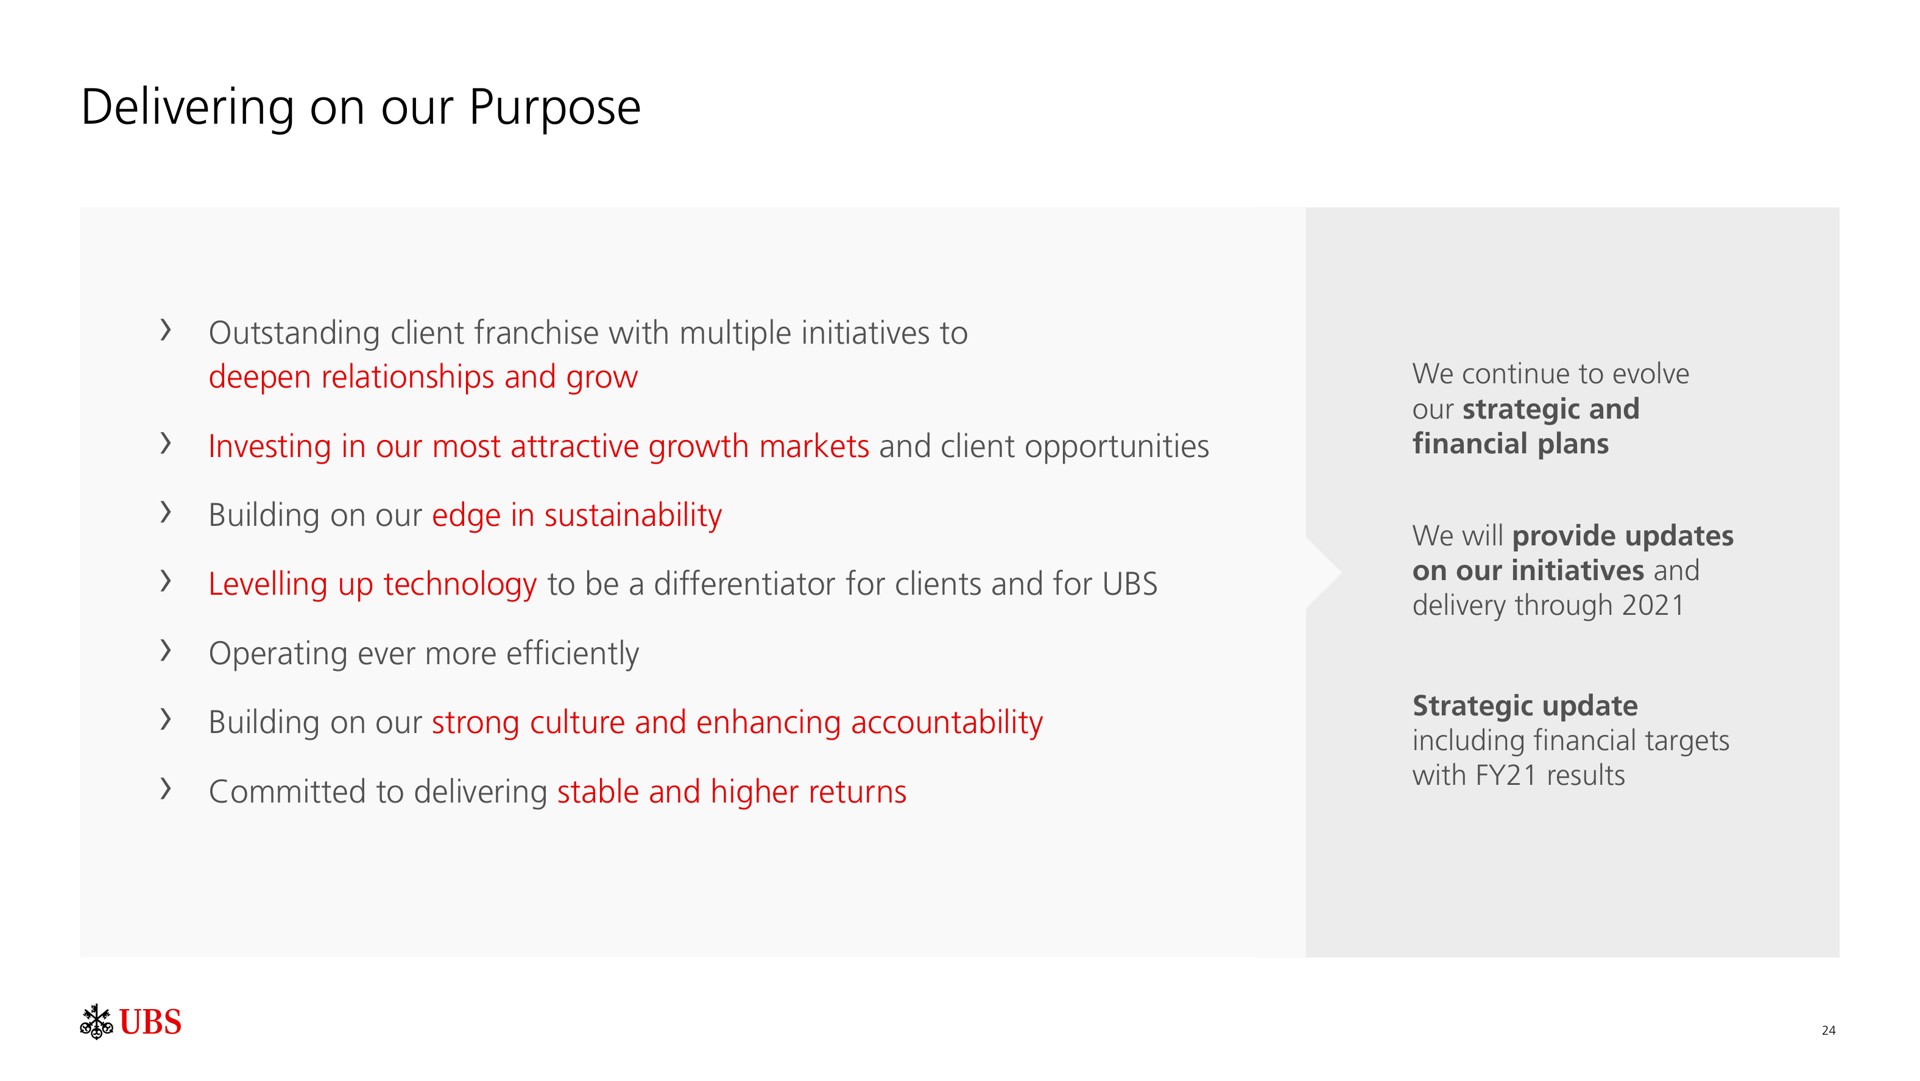 delivering on our purpose | UBS